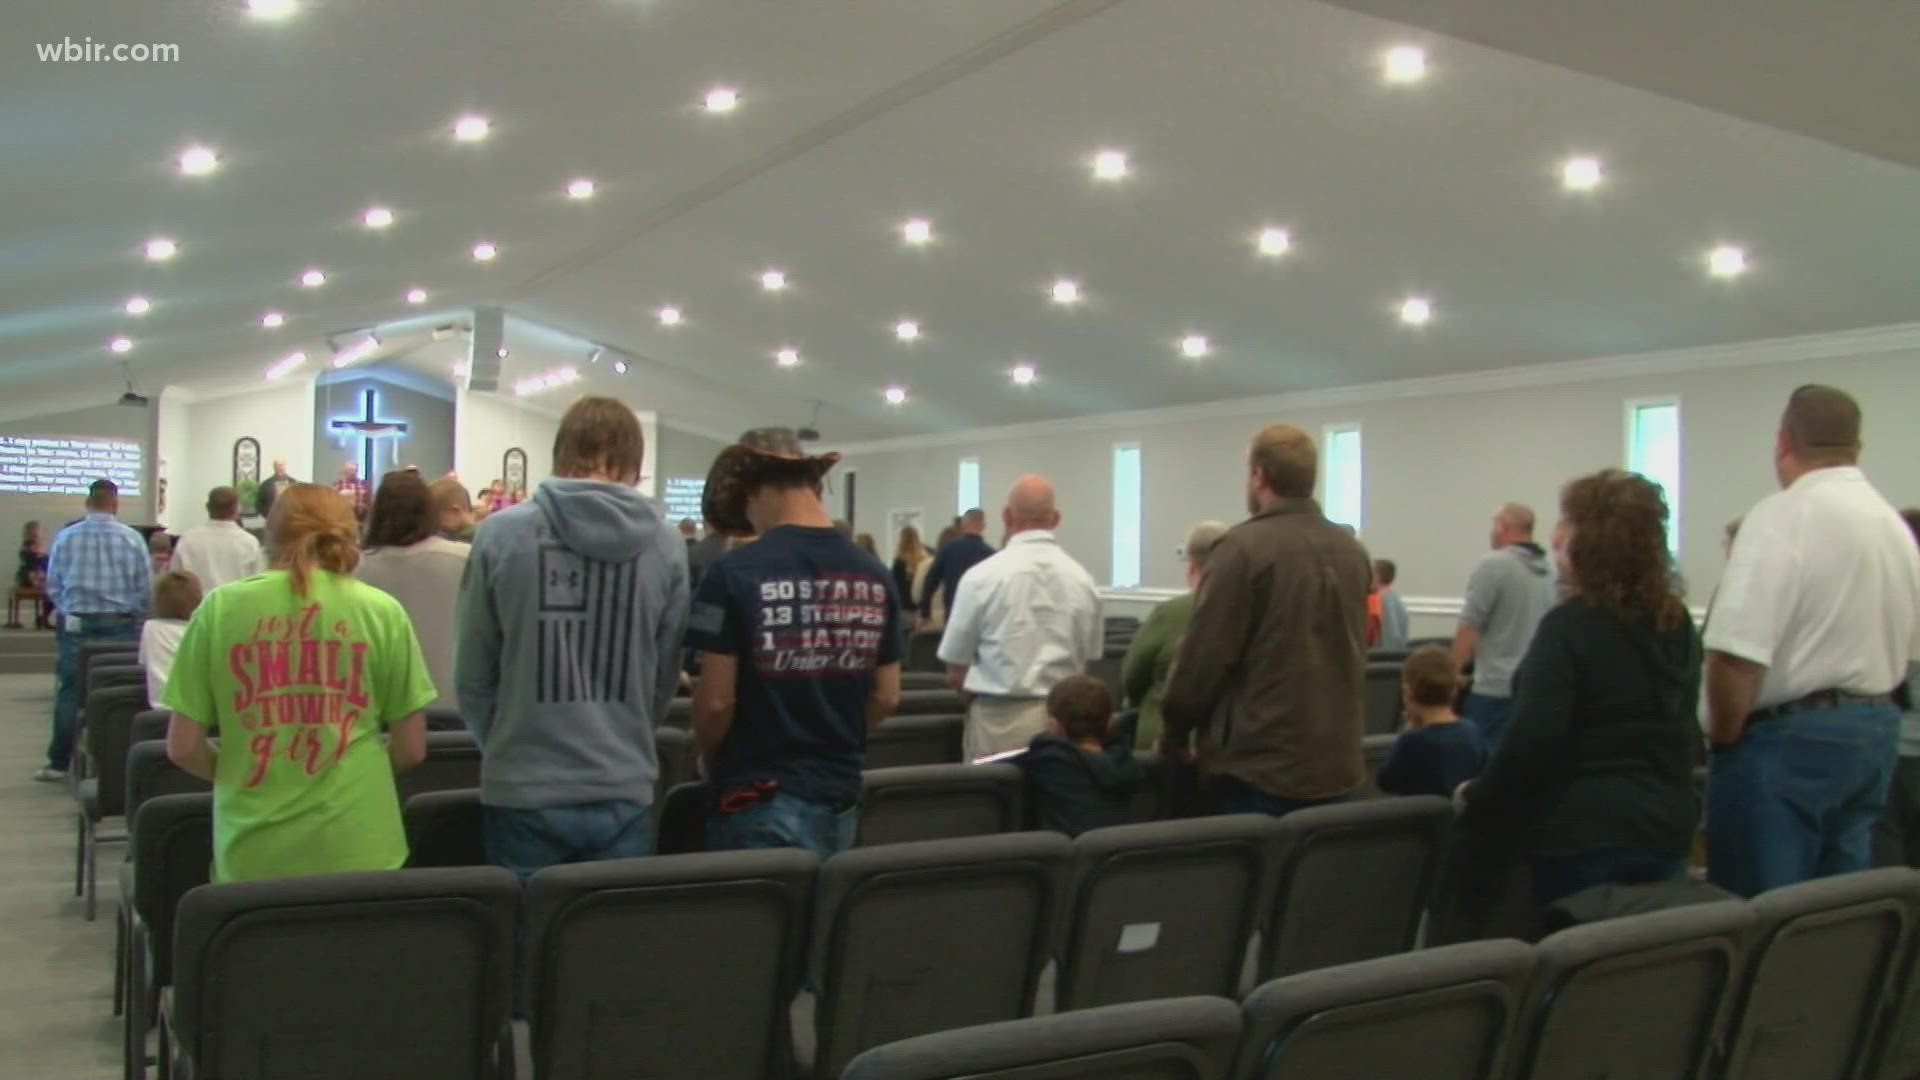 A group in Maryville wants to teach churches about mental health issues so they can better connect with their communities.